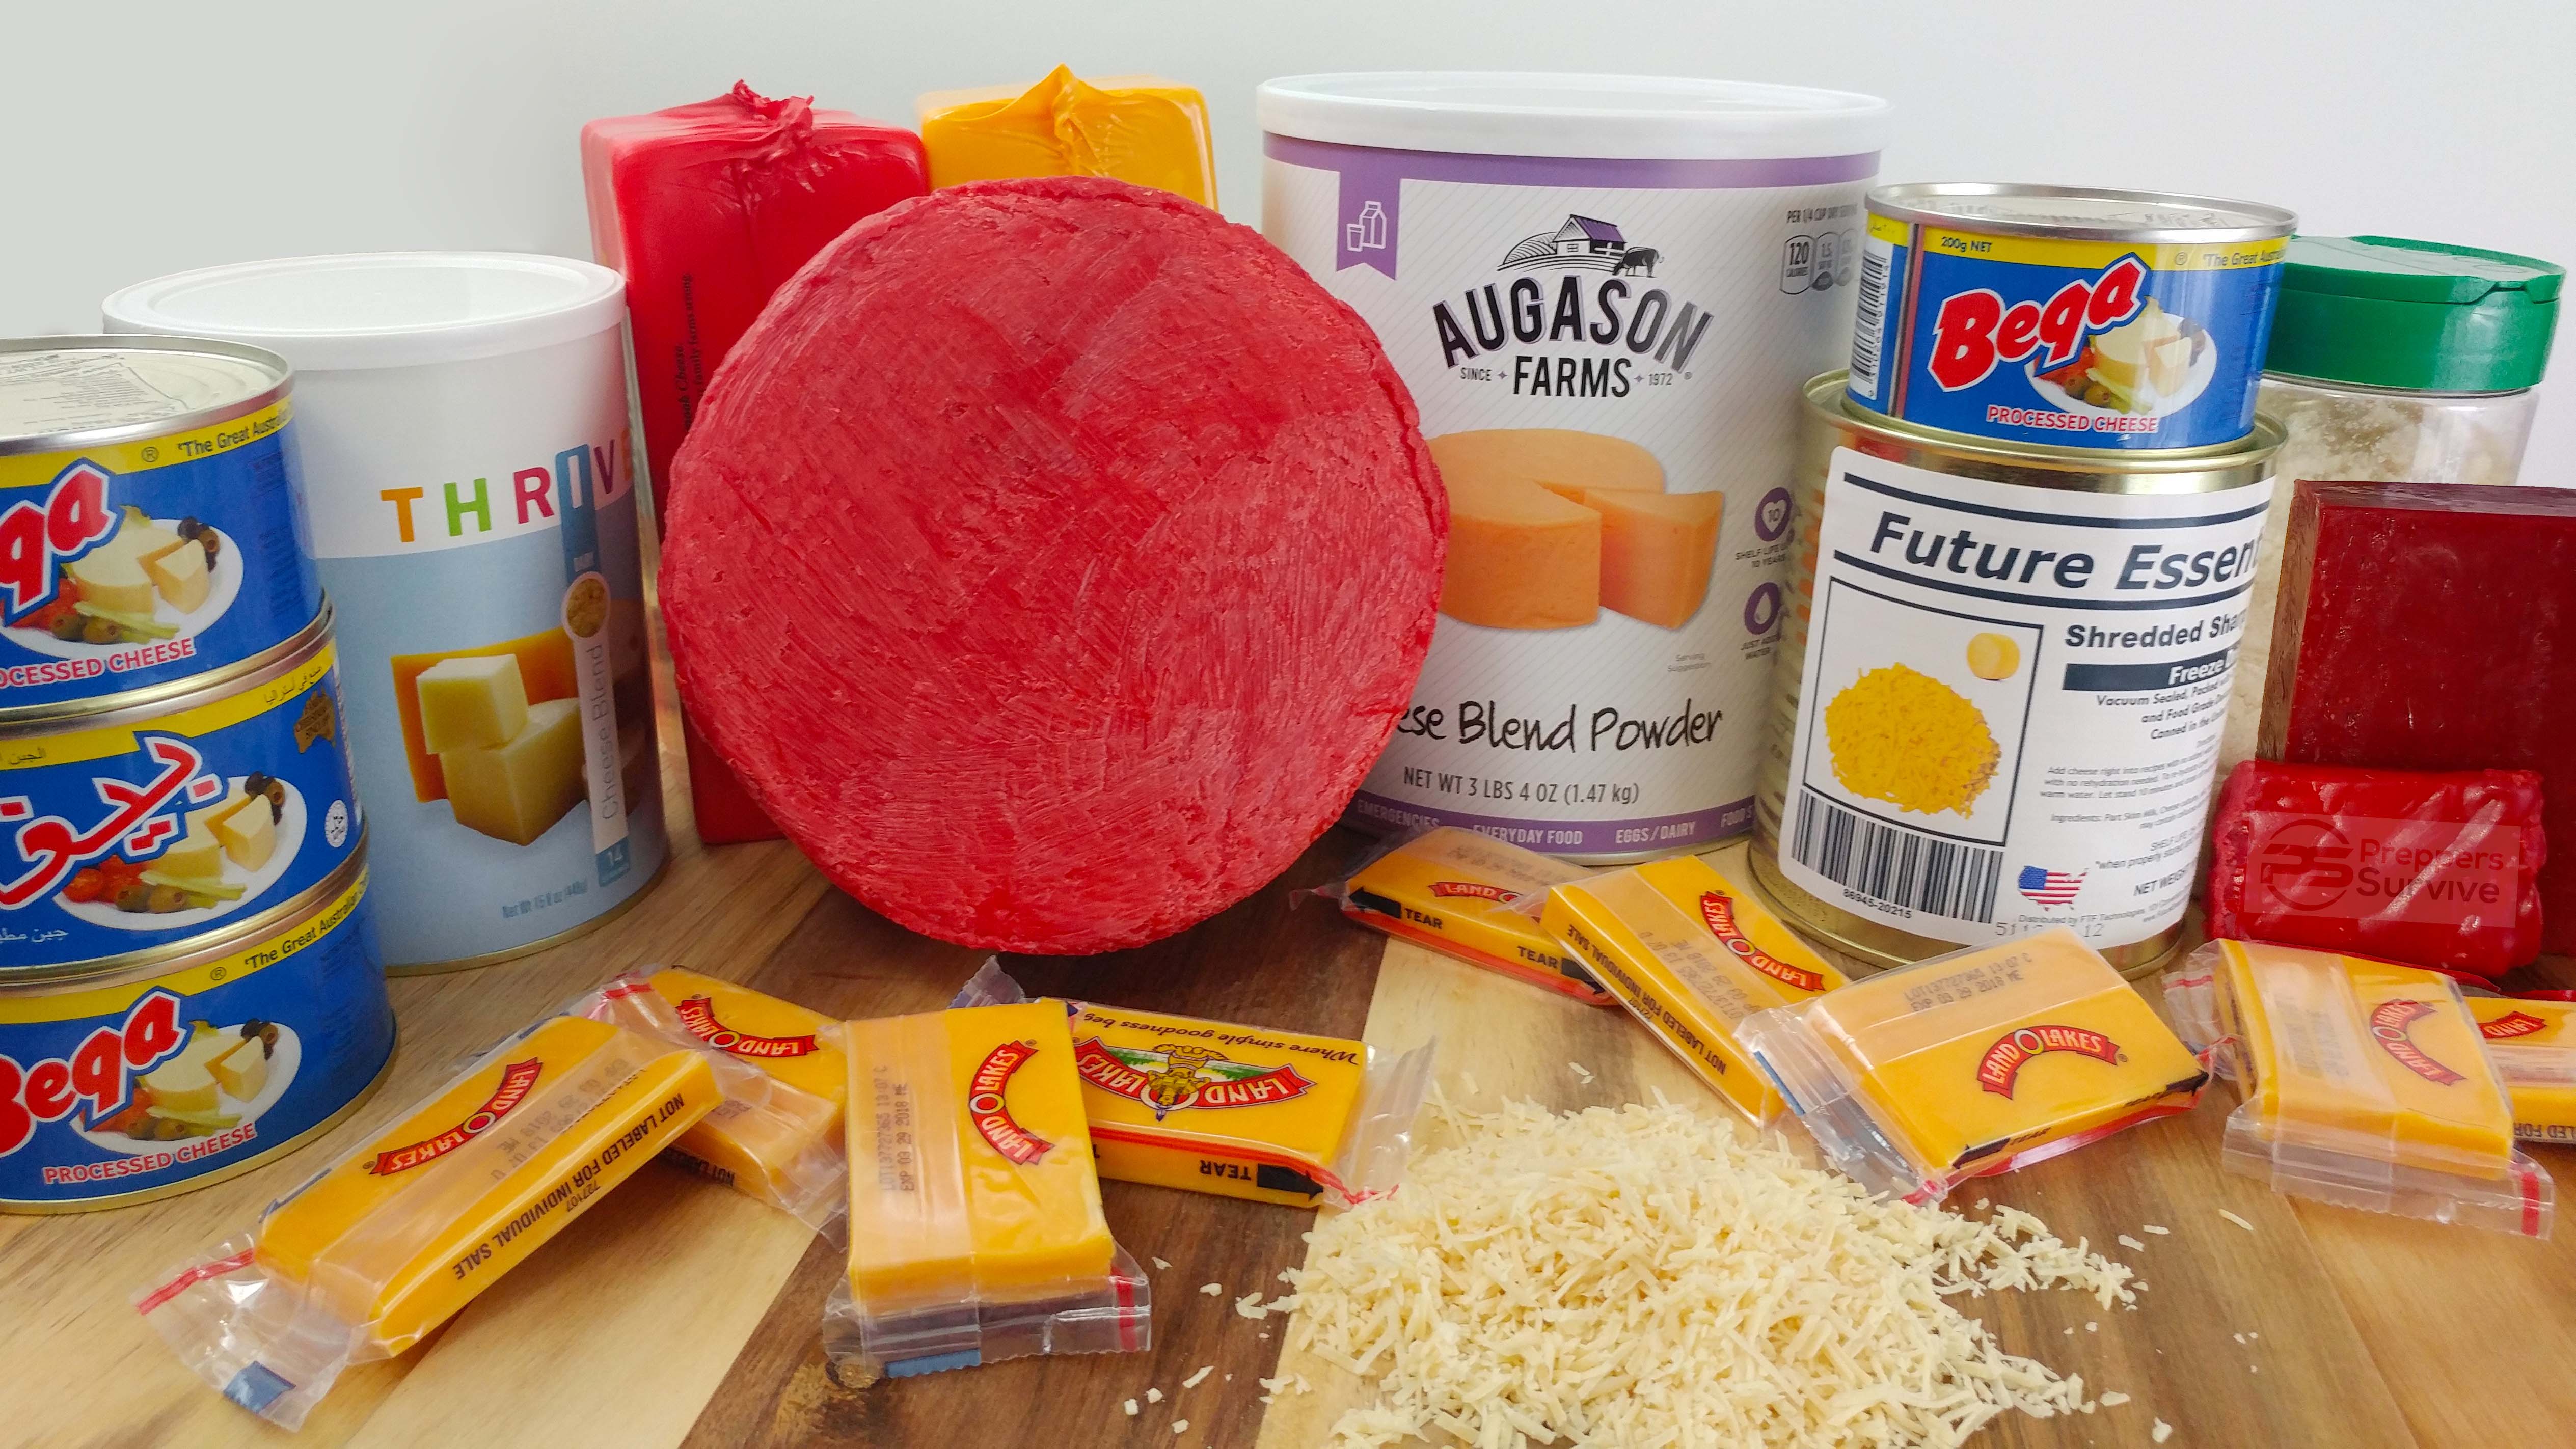 Have You Added Cheese to Your Food Storage? - Survival Prepper